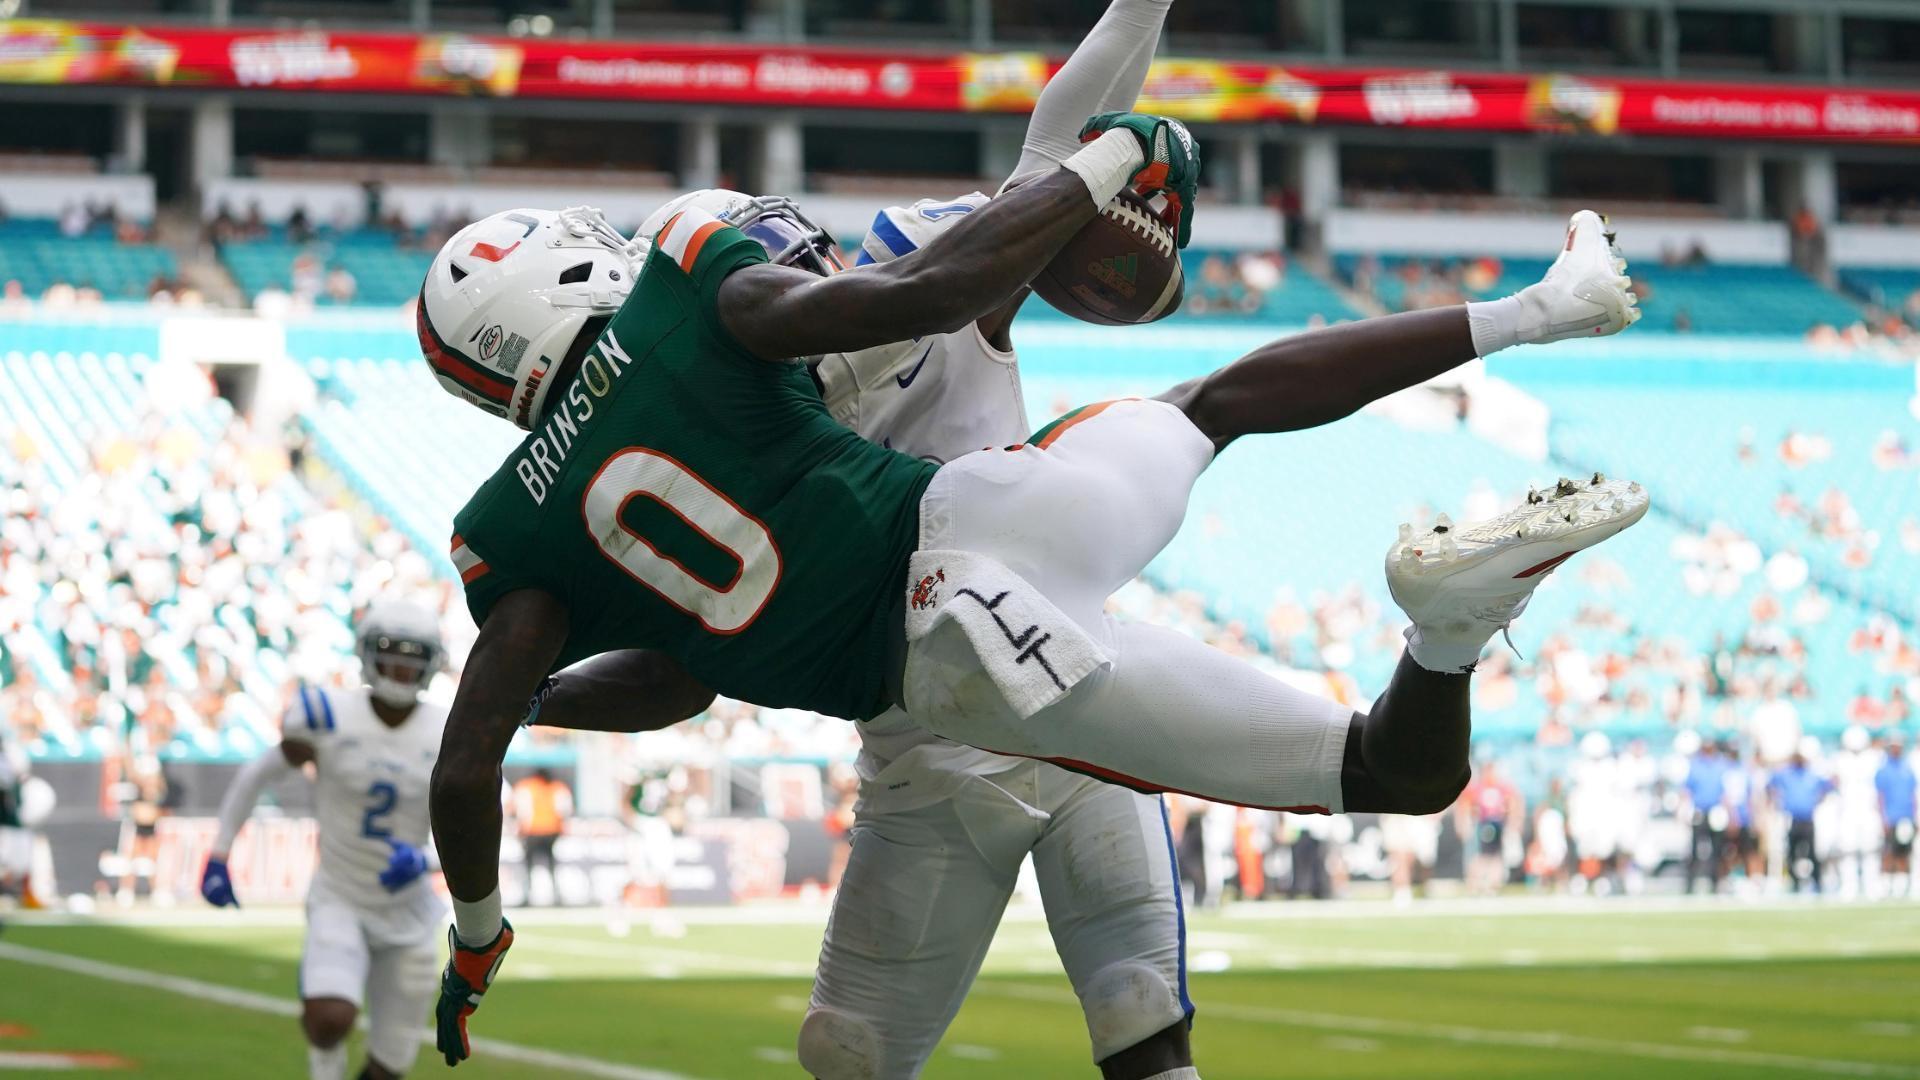 Miami WR hauls in incredible one-handed TD grab